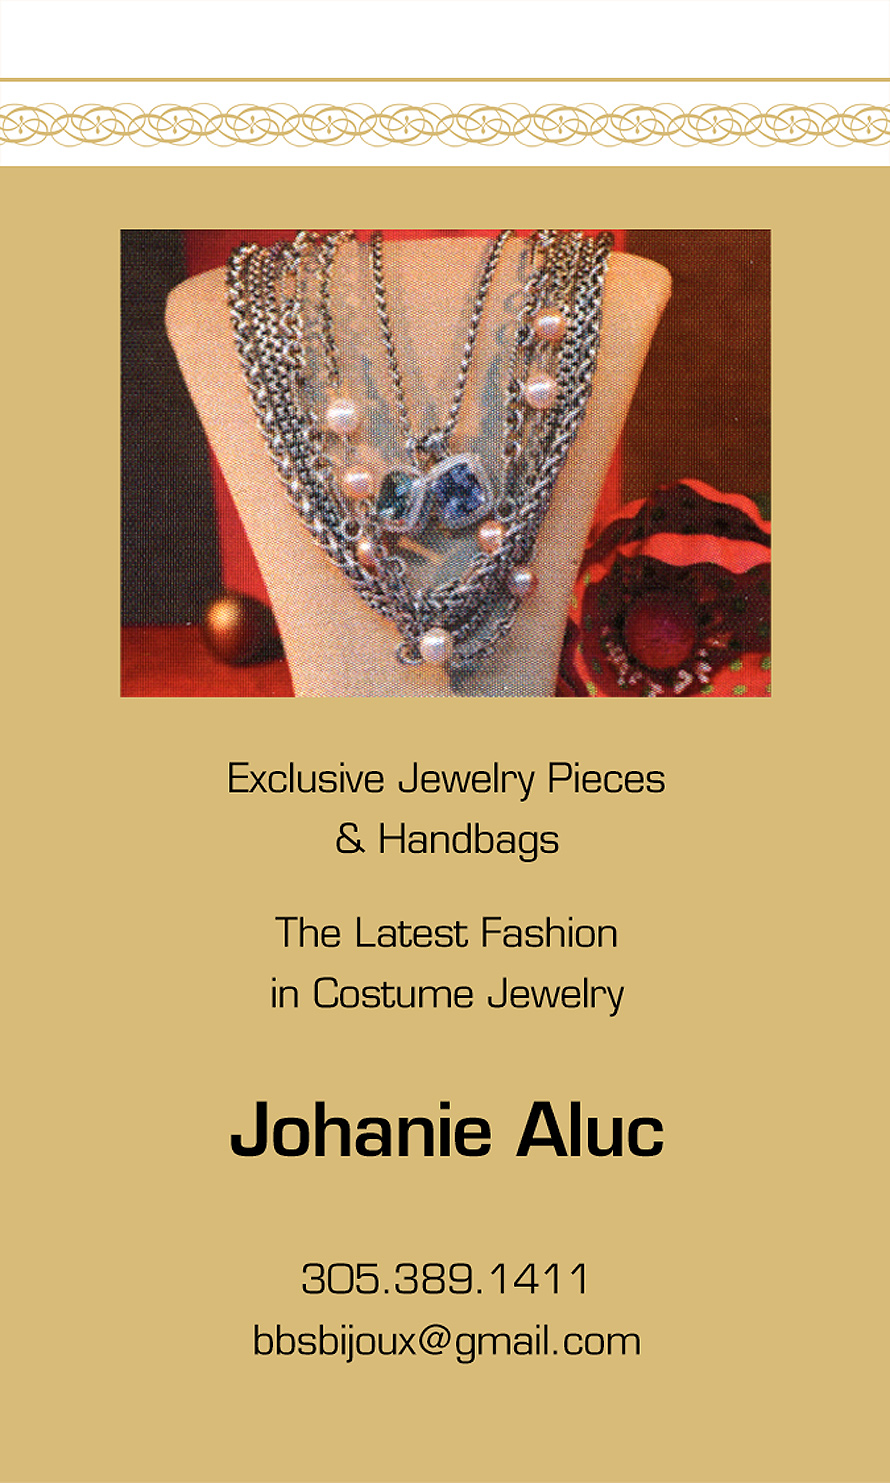 Exclusive Jewelry Pieces and Handbags